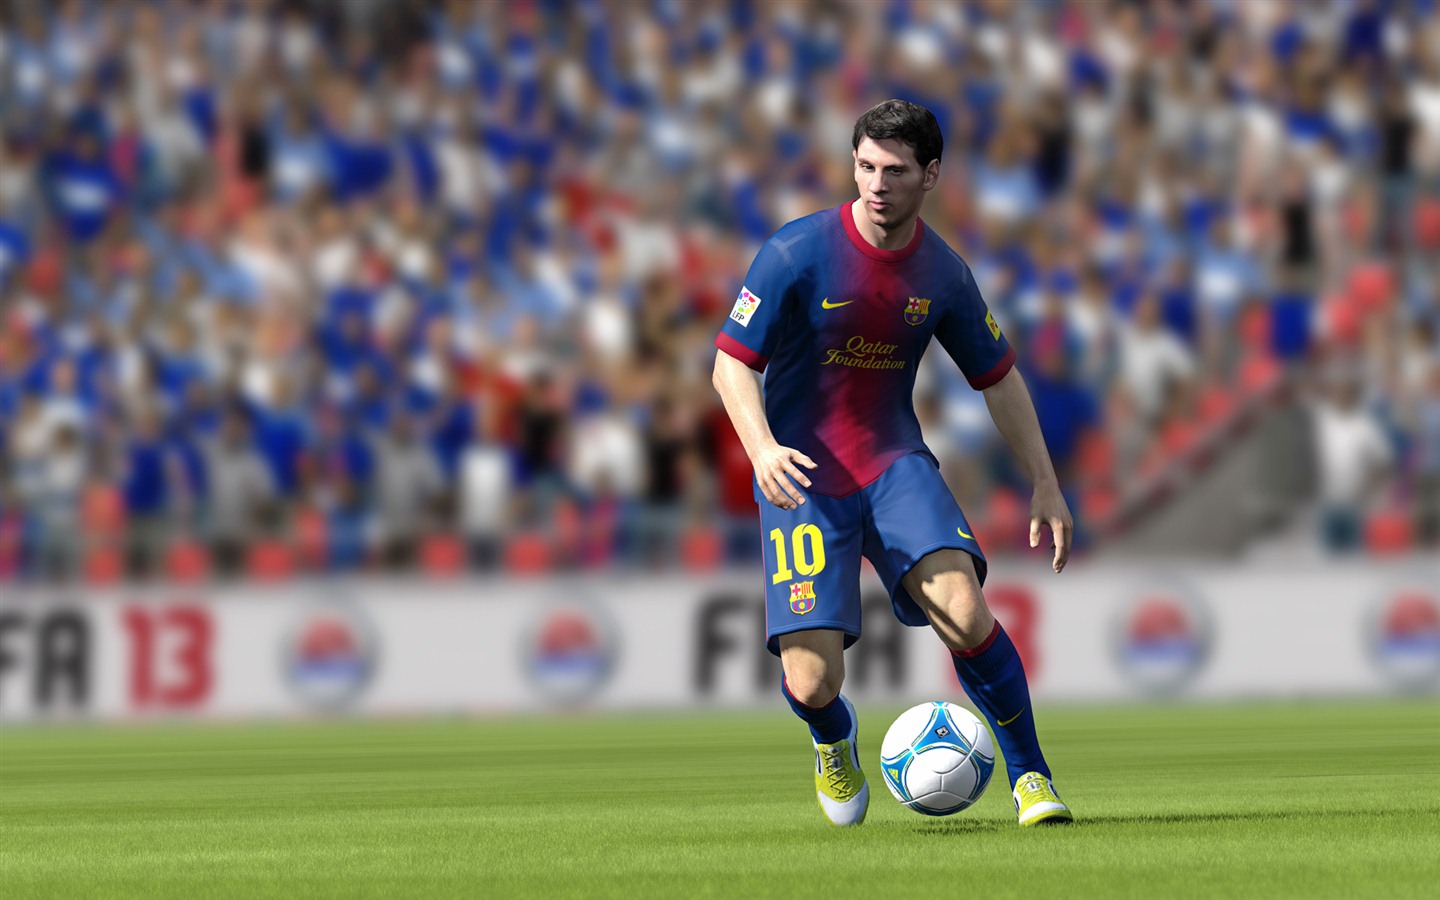 FIFA 13 game HD wallpapers #14 - 1440x900